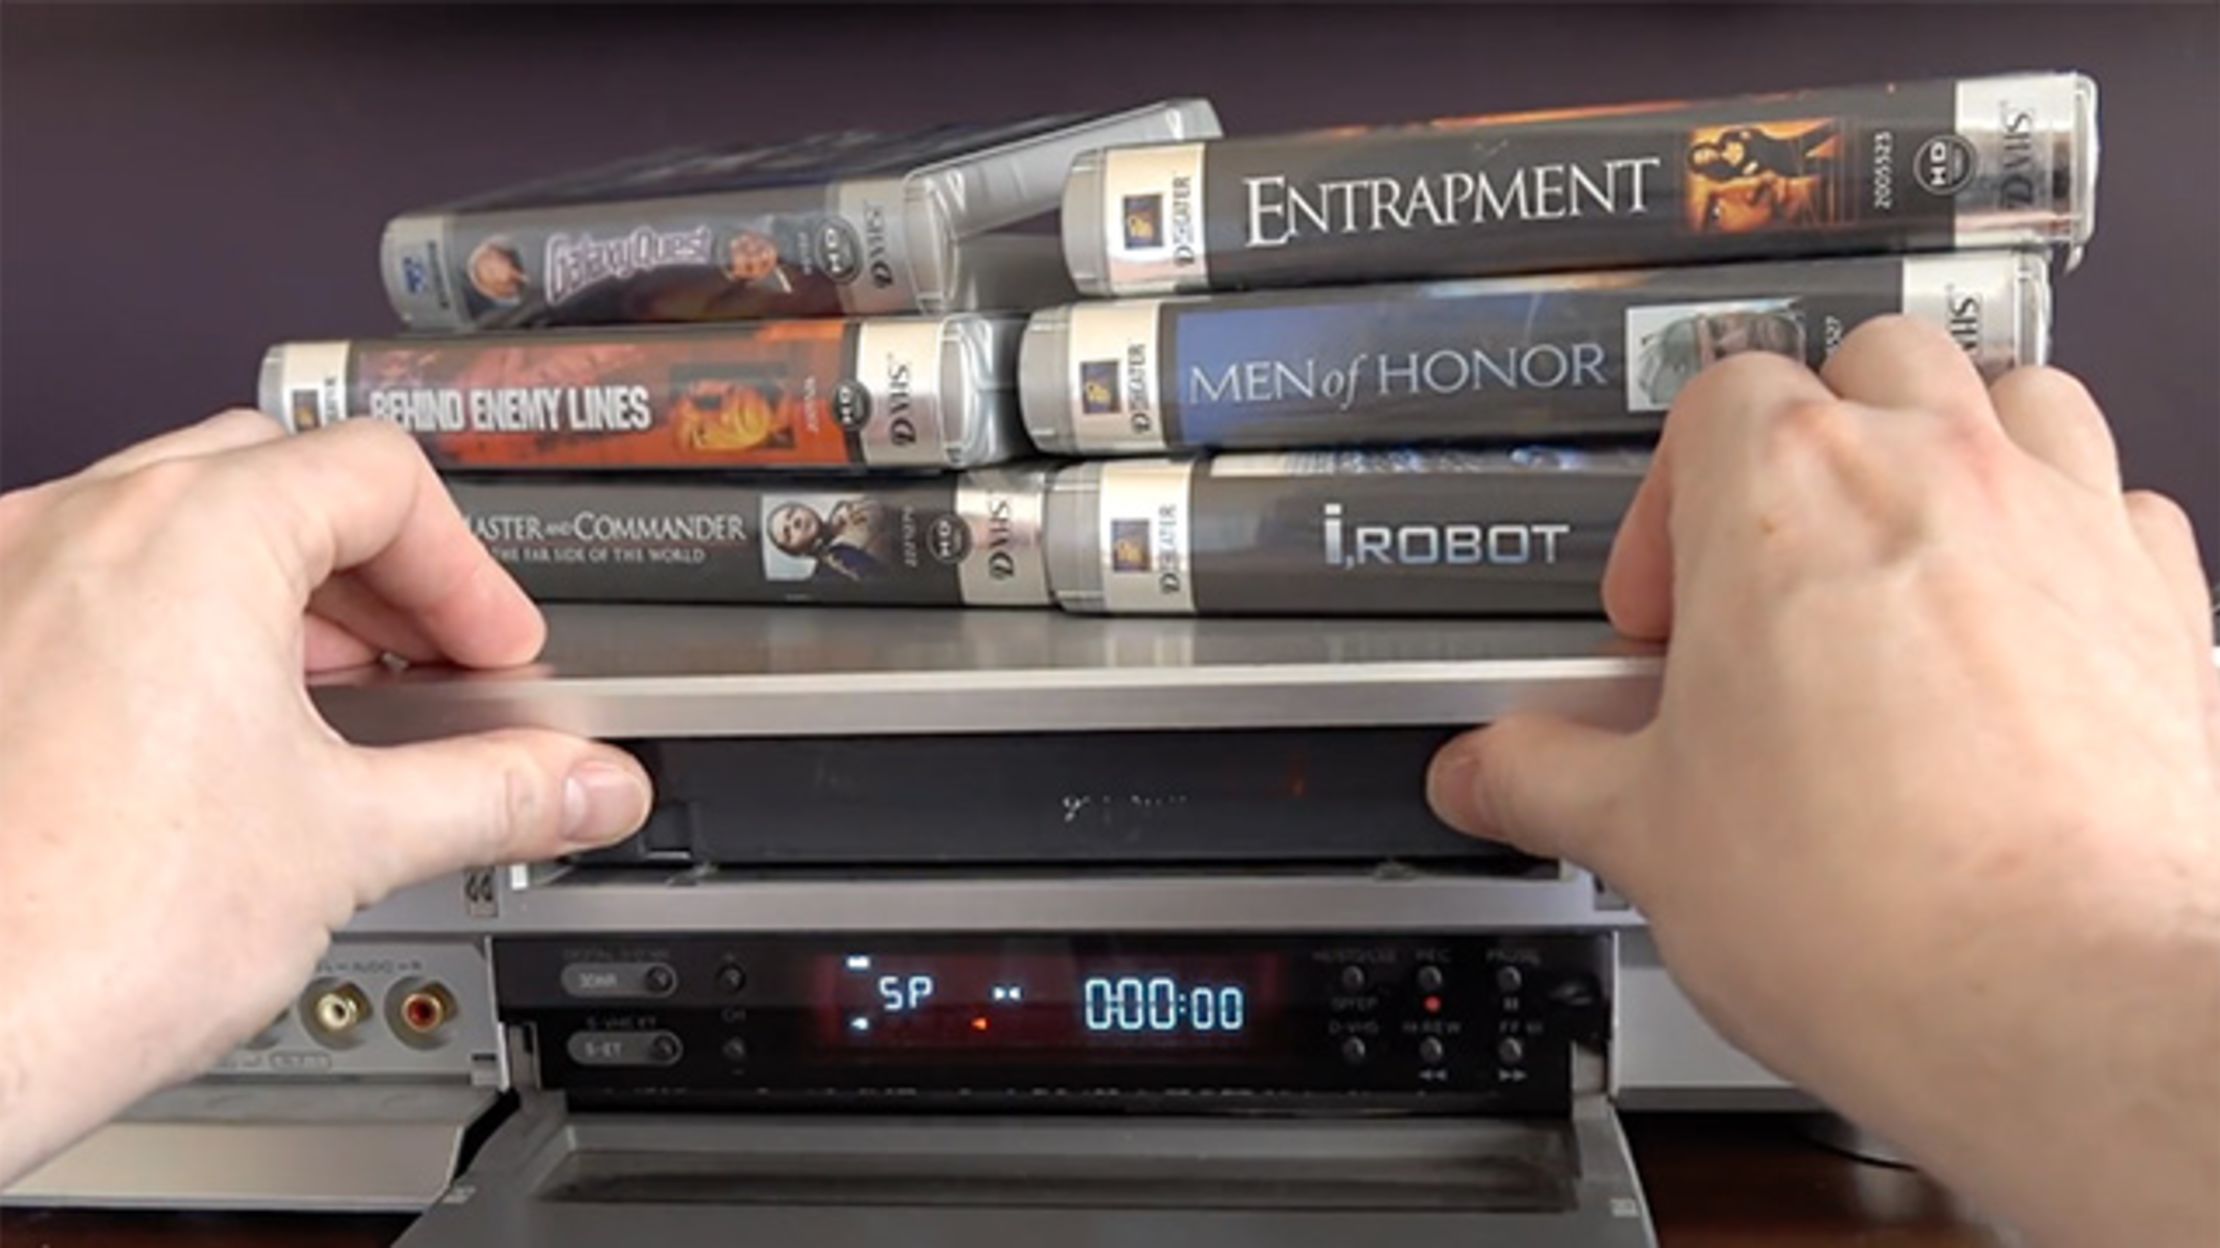 Remember When Hd Movies Came On Vhs Tapes Mental Floss.